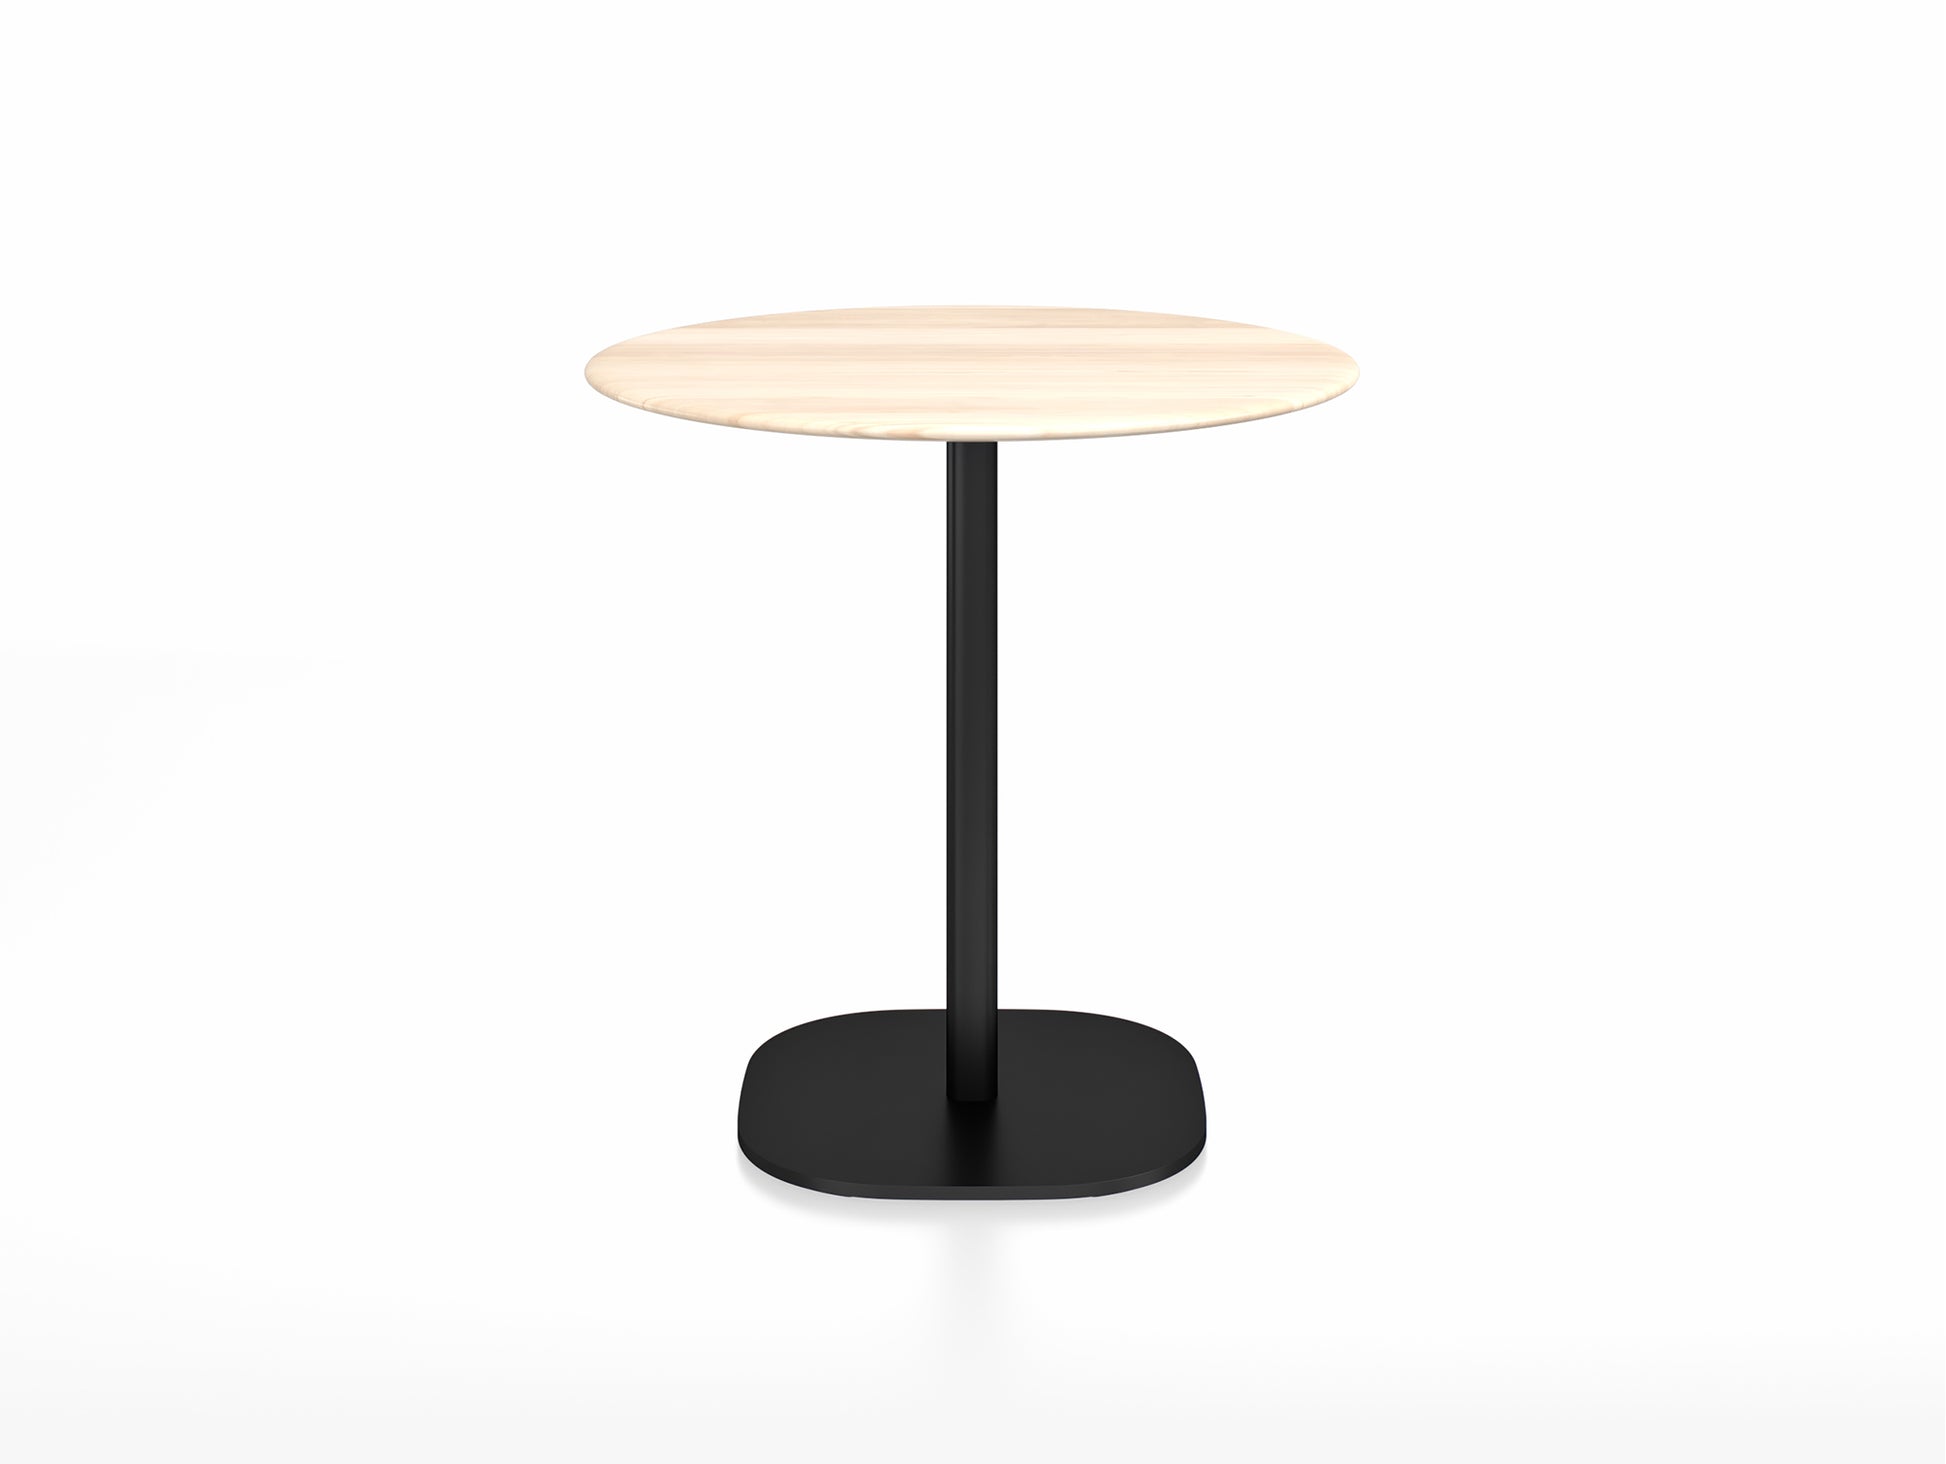 2 Inch Outdoor Cafe Table - Flat Base by Emeco - Diameter 76 cm